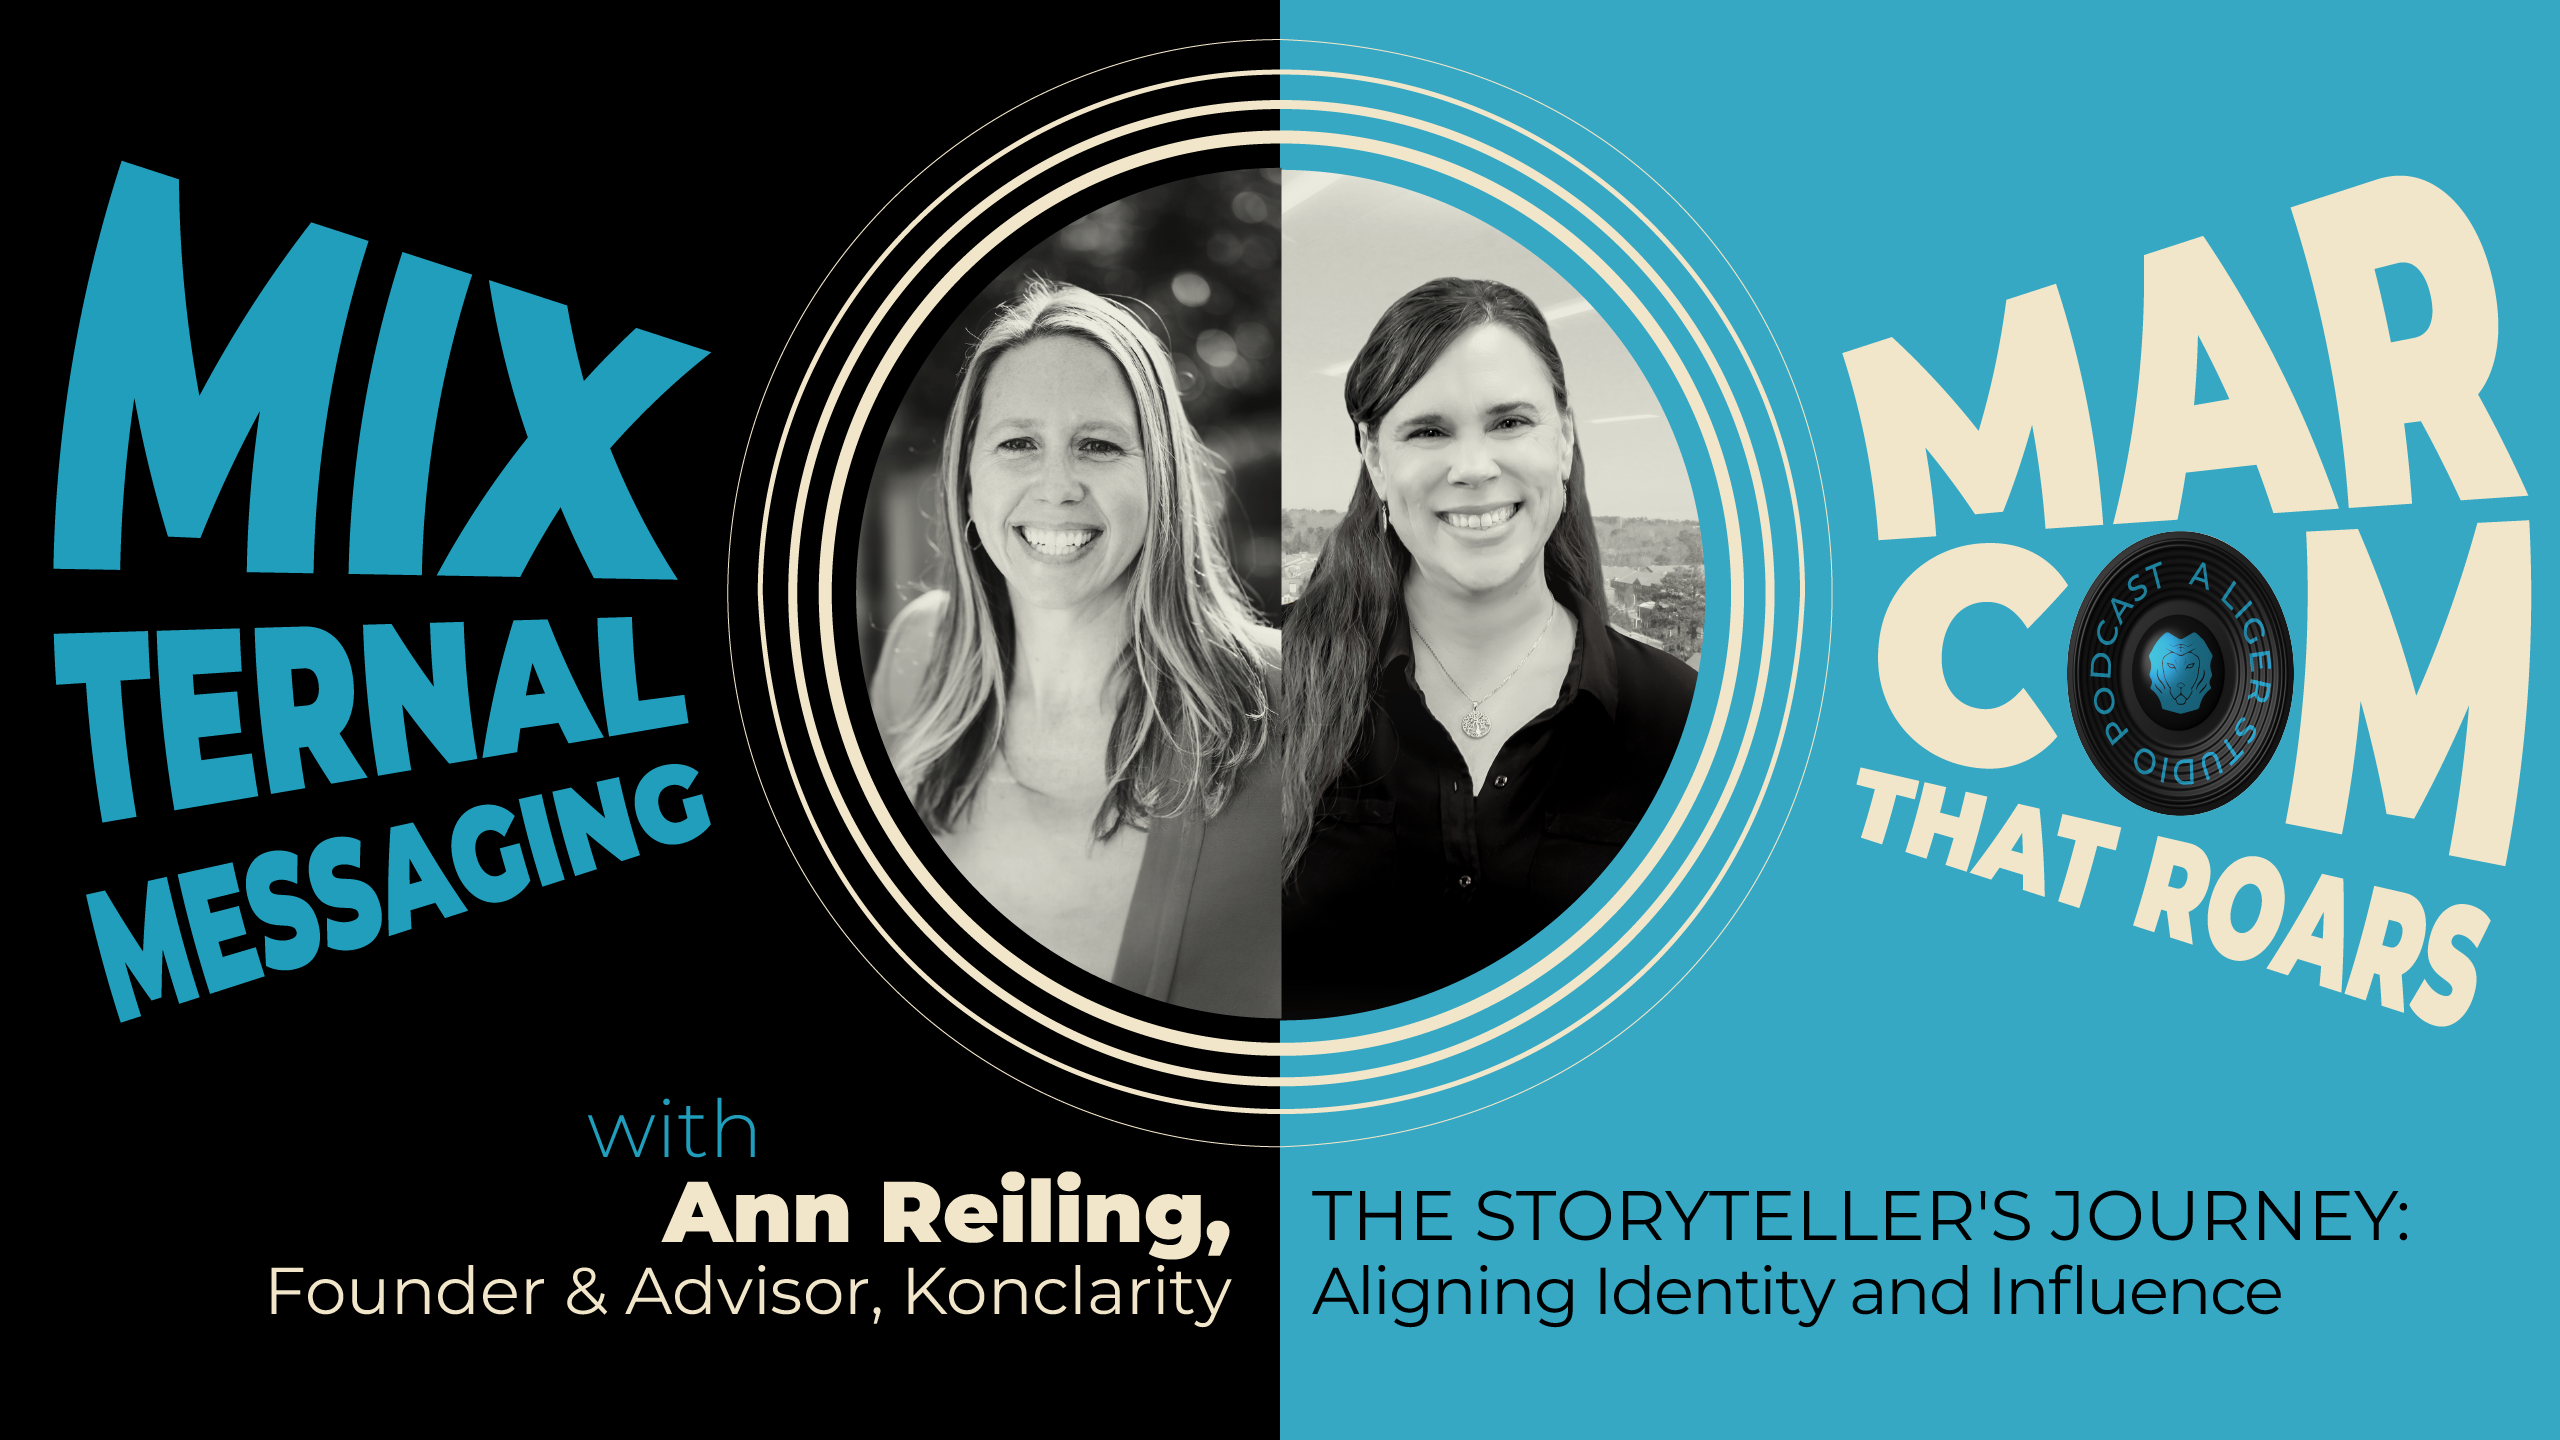 The Storyteller’s Journey: Aligning Identity and Influence with Ann Reiling